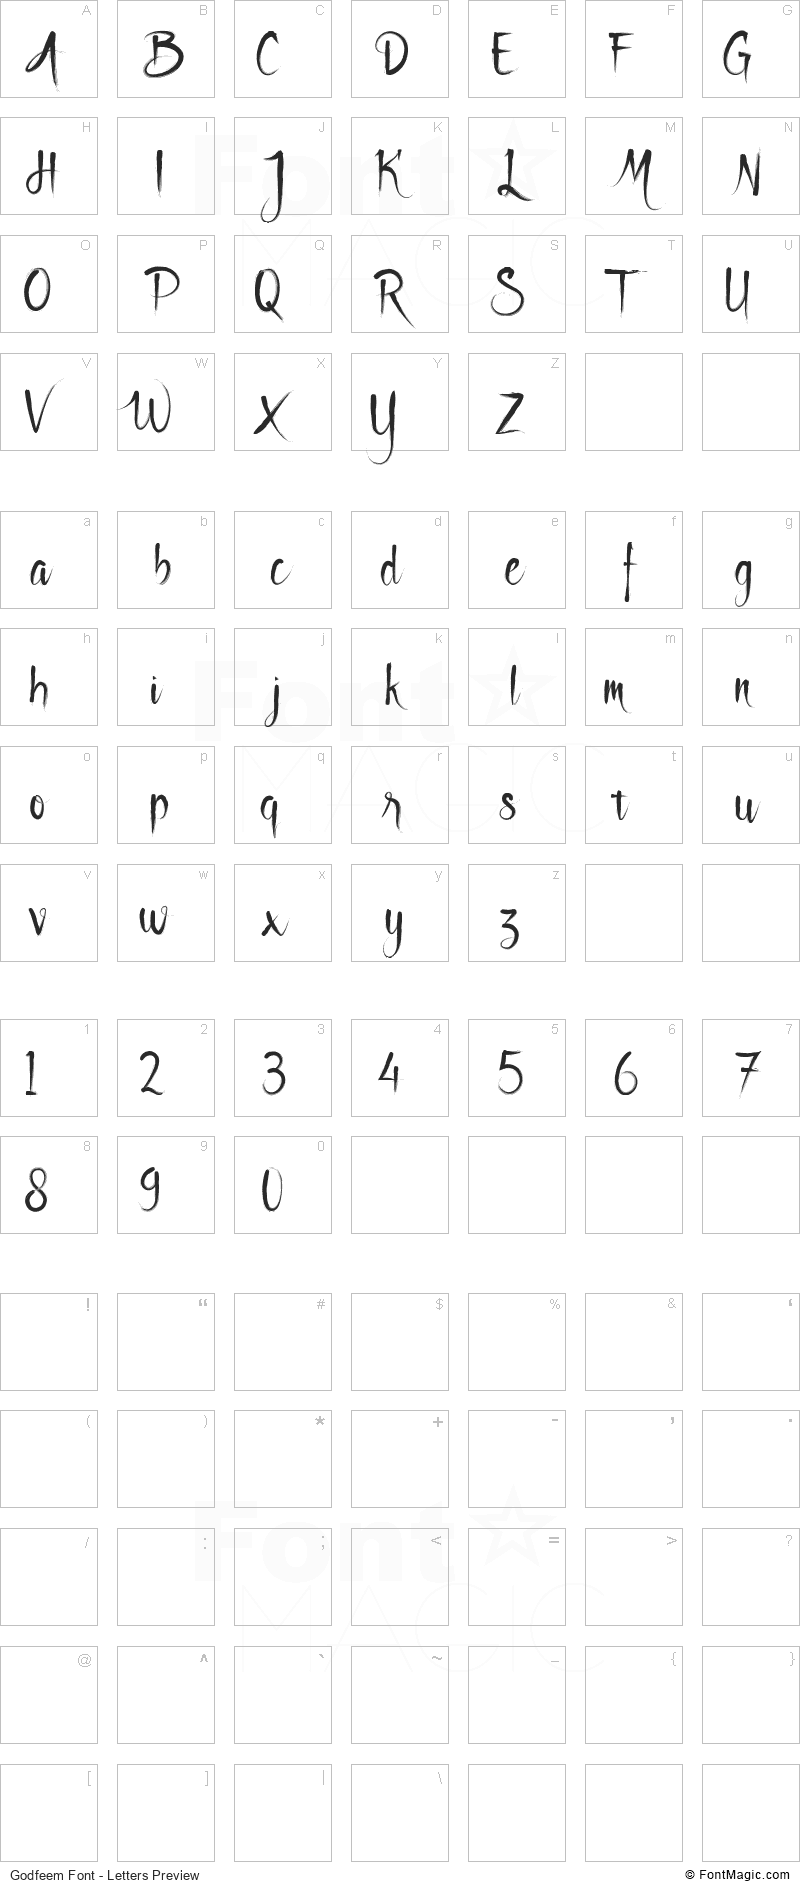 Godfeem Font - All Latters Preview Chart